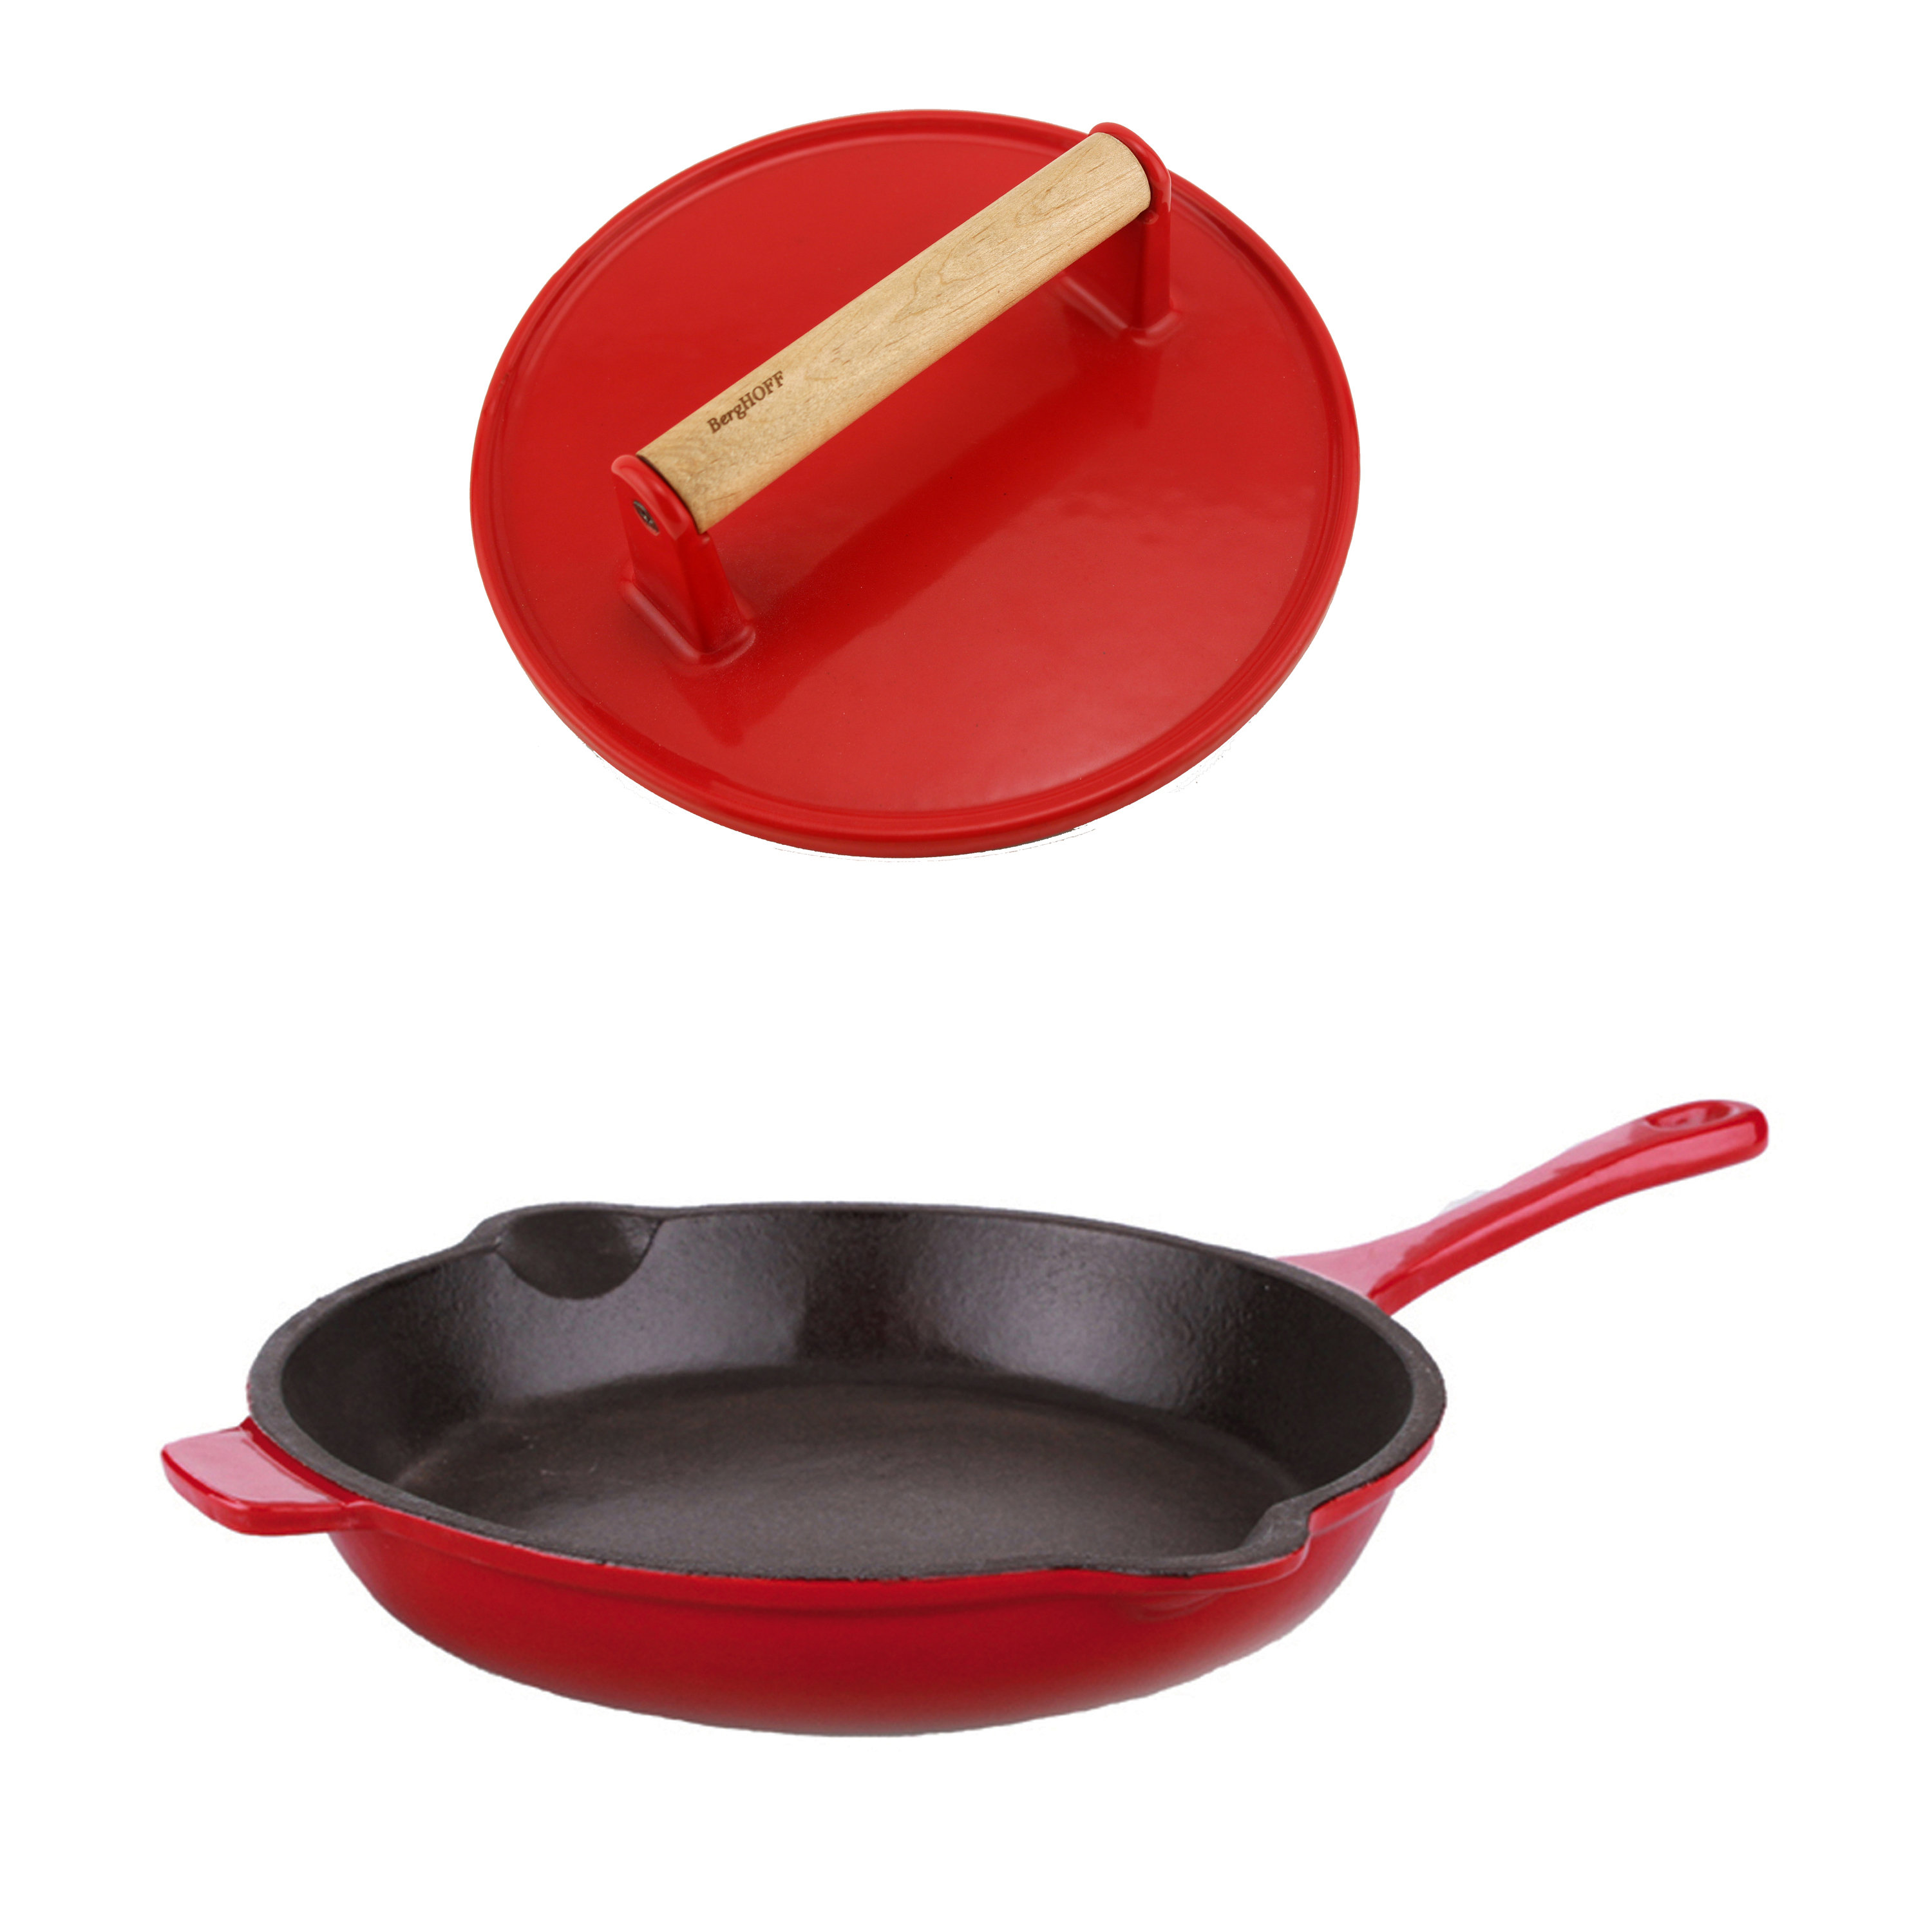 Megachef Enamel Cast Iron Pan with Matching Grill Press, 11 Inch, Red